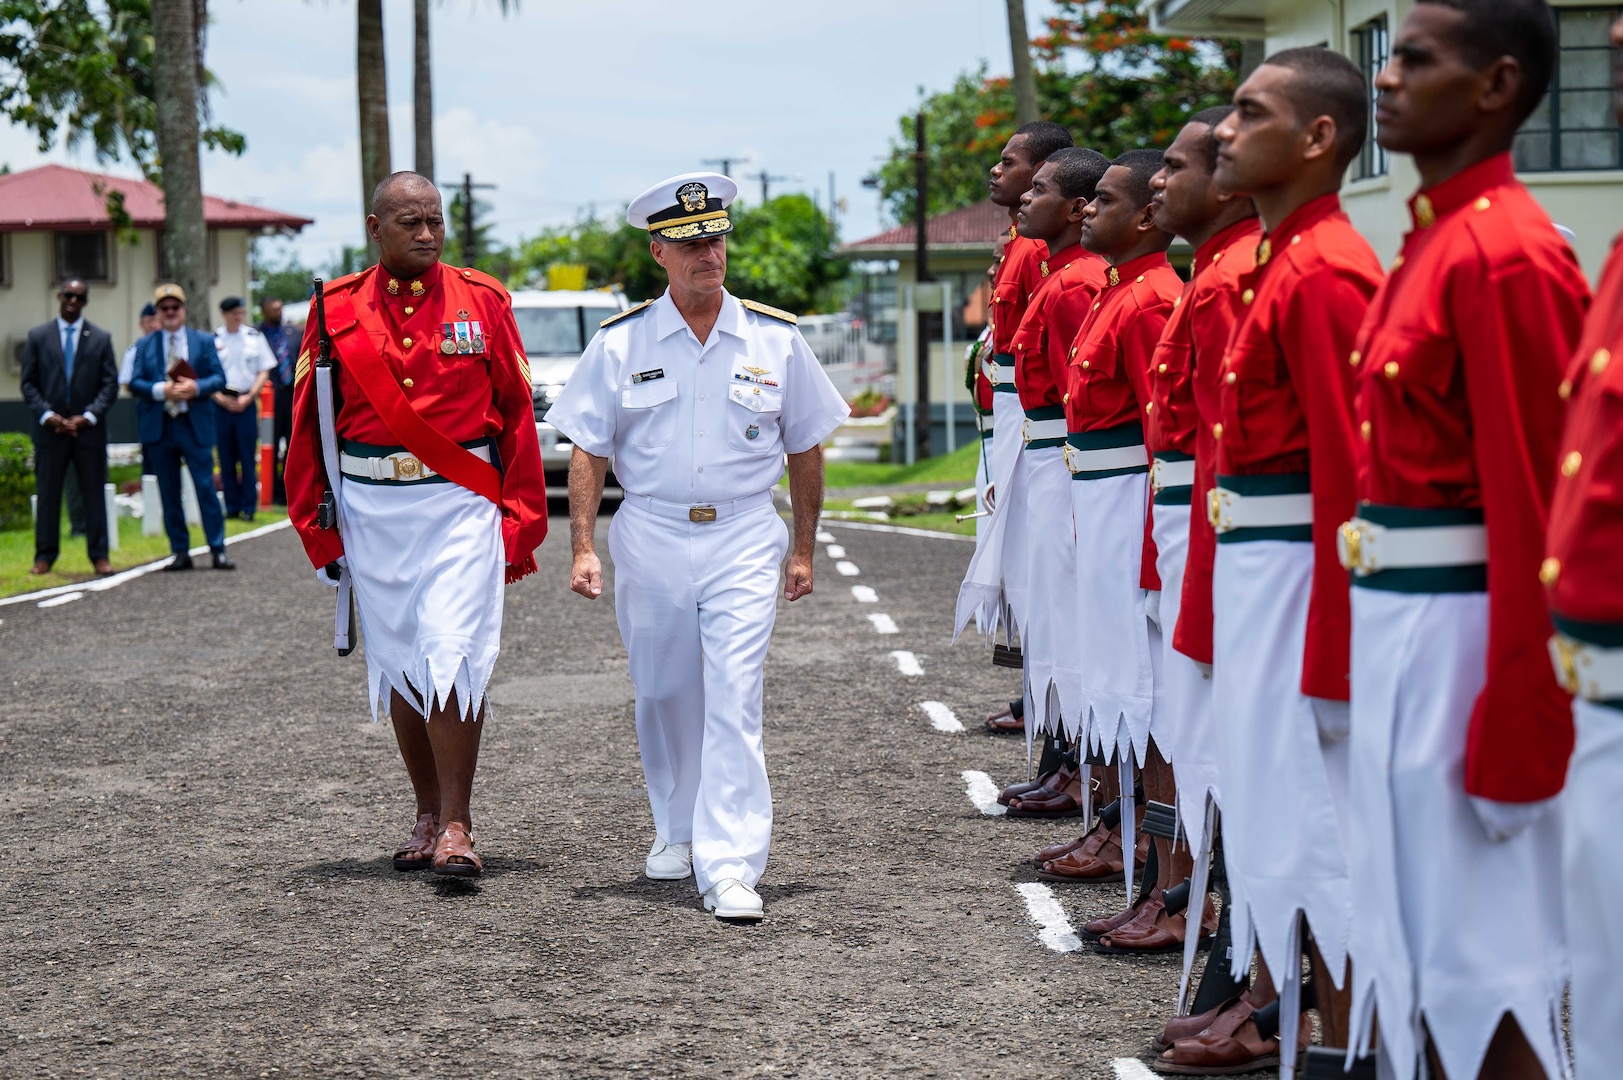 Adm. John C. Aquilino, Commander of U.S. Indo-Pacific Command, traveled to Fiji Jan. 30-31, to reaffirm the strength of the bilateral relationship and advance shared interests in building a more peaceful, stable, and prosperous Indo-Pacific region.